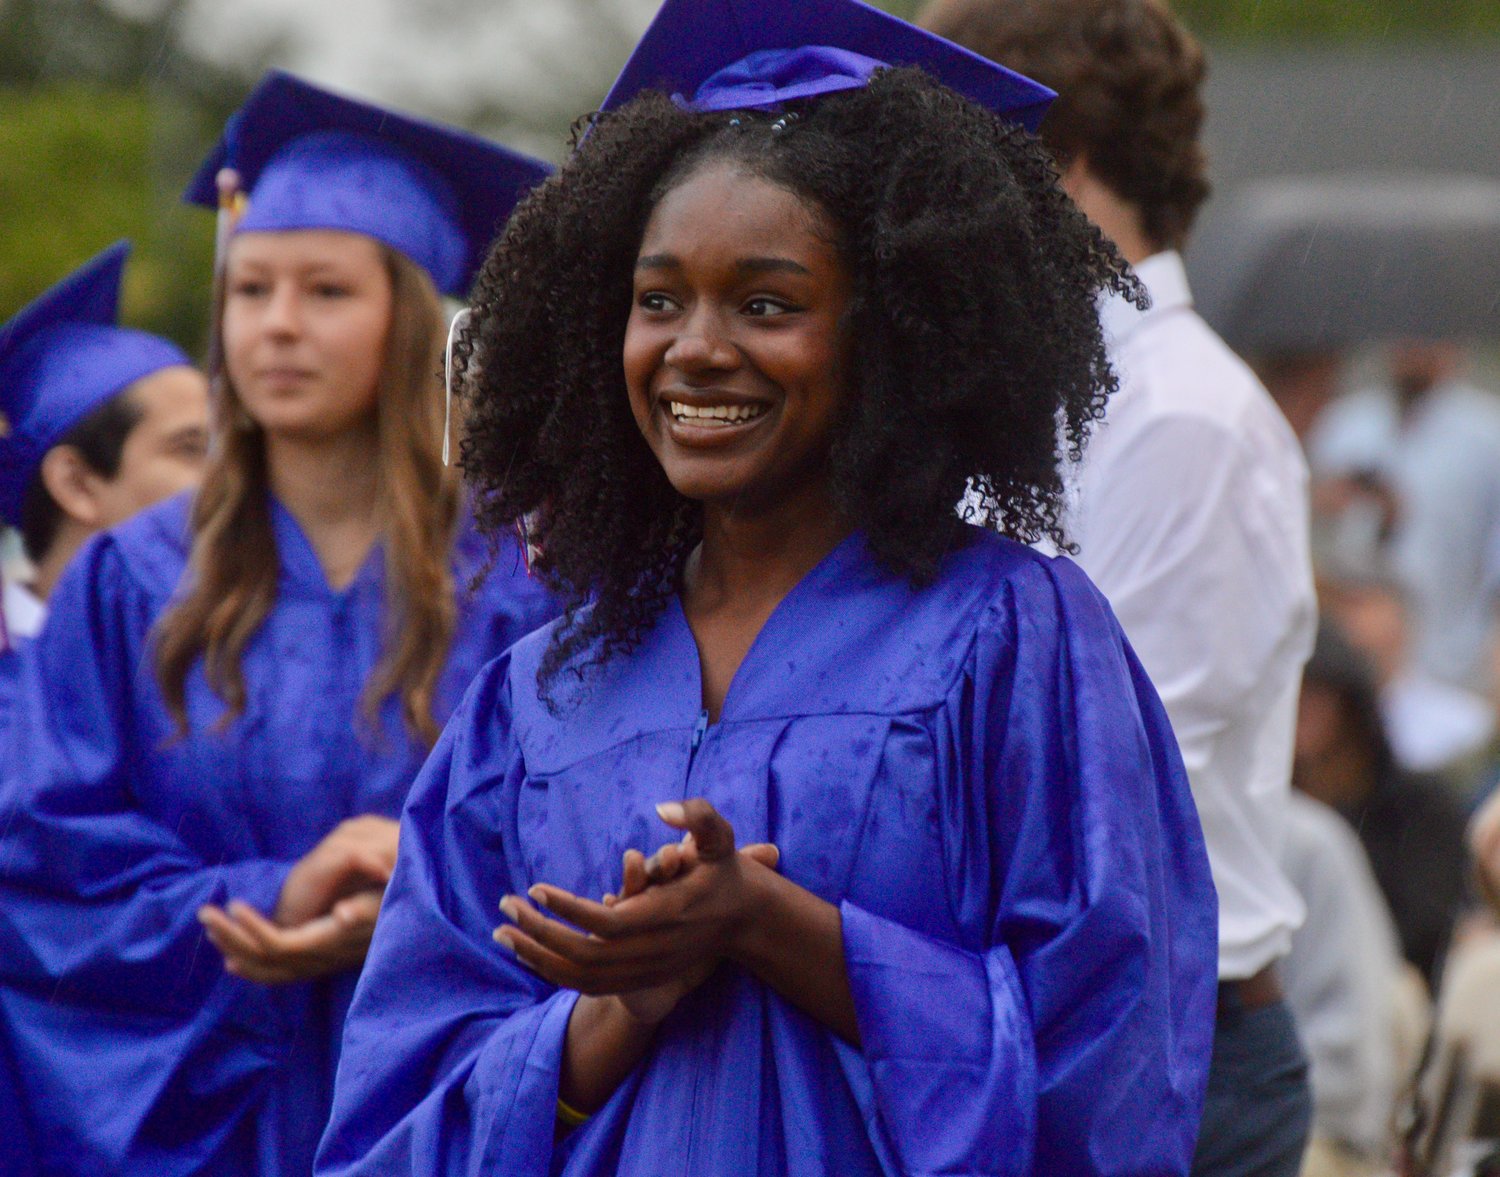 Zanai Williams claps for a fellow graduate receiving a diploma, just before collecting her own. Gentle rain began falling near the end of the ceremony, but it did not disrupt the event.